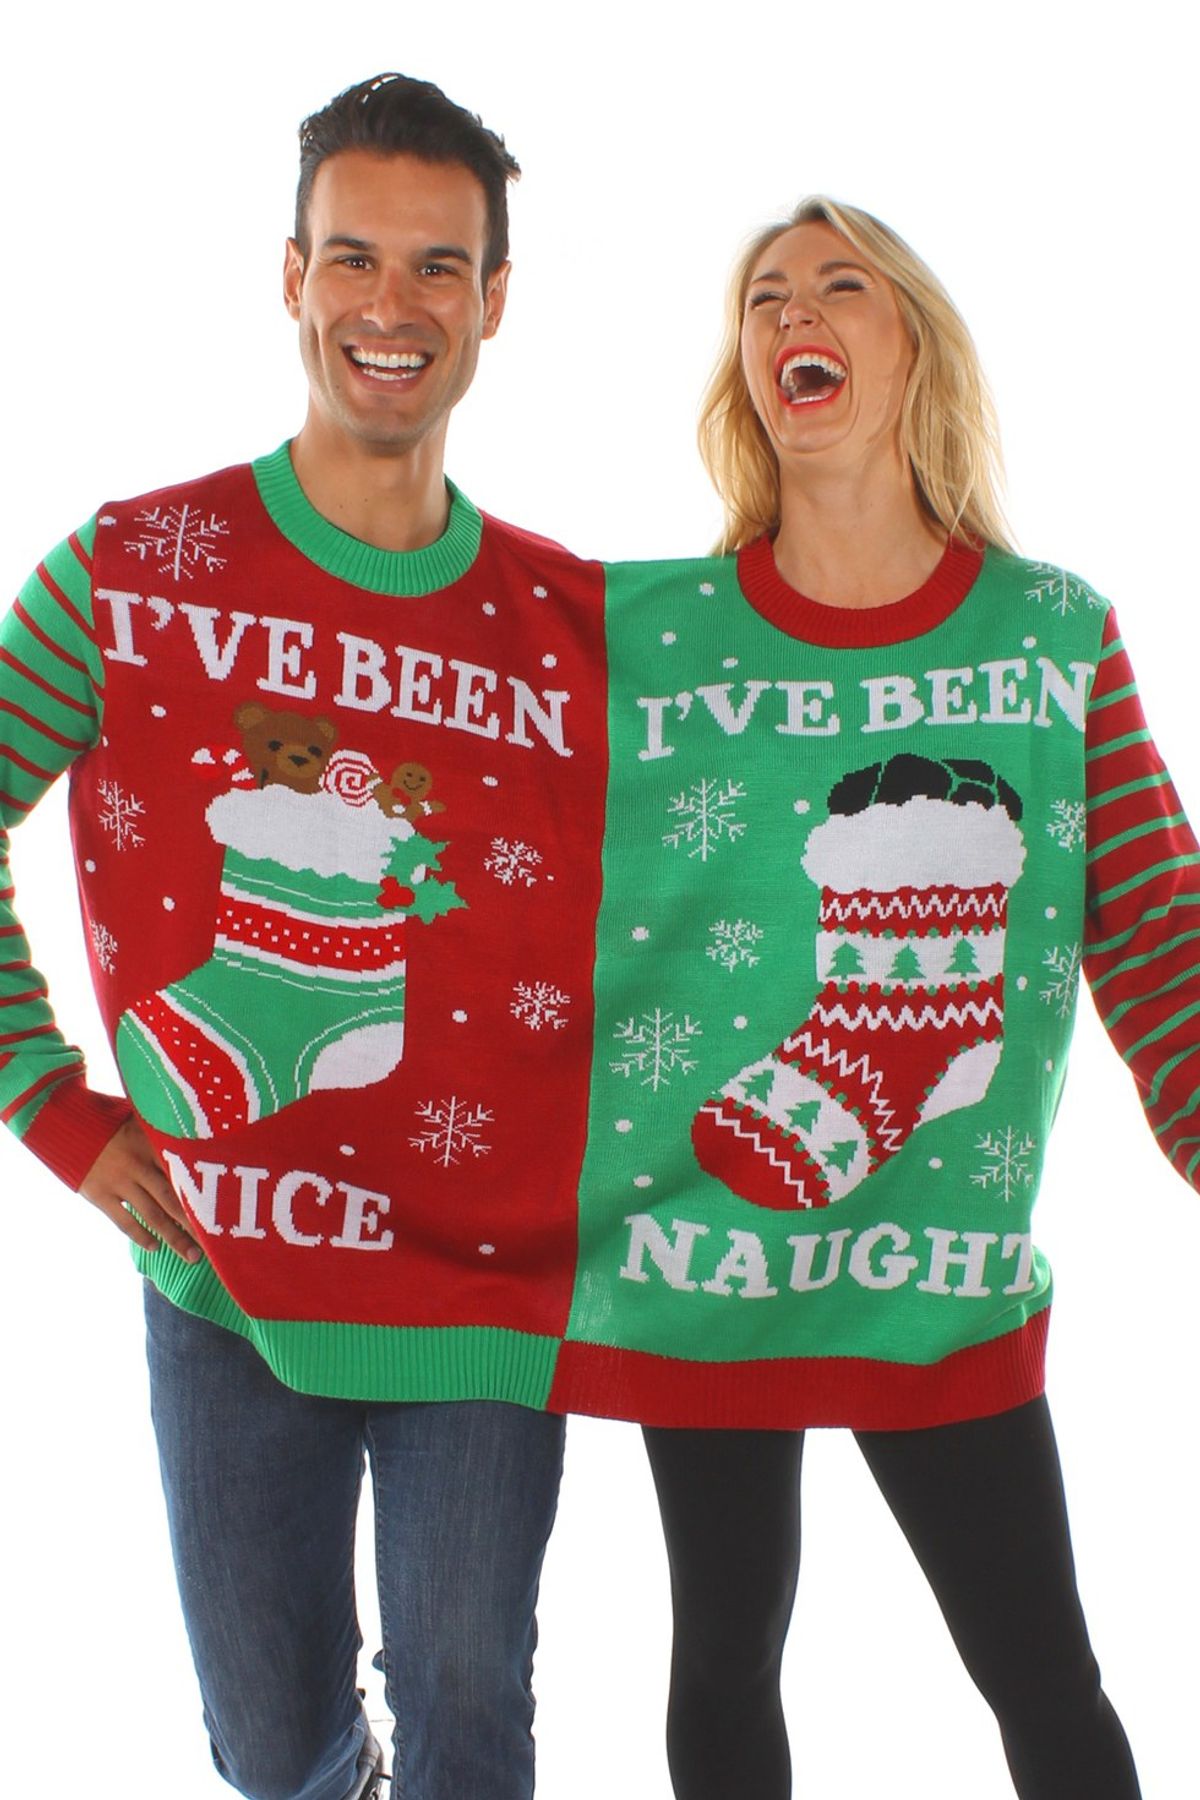 25 Of The Worst Christmas Gifts